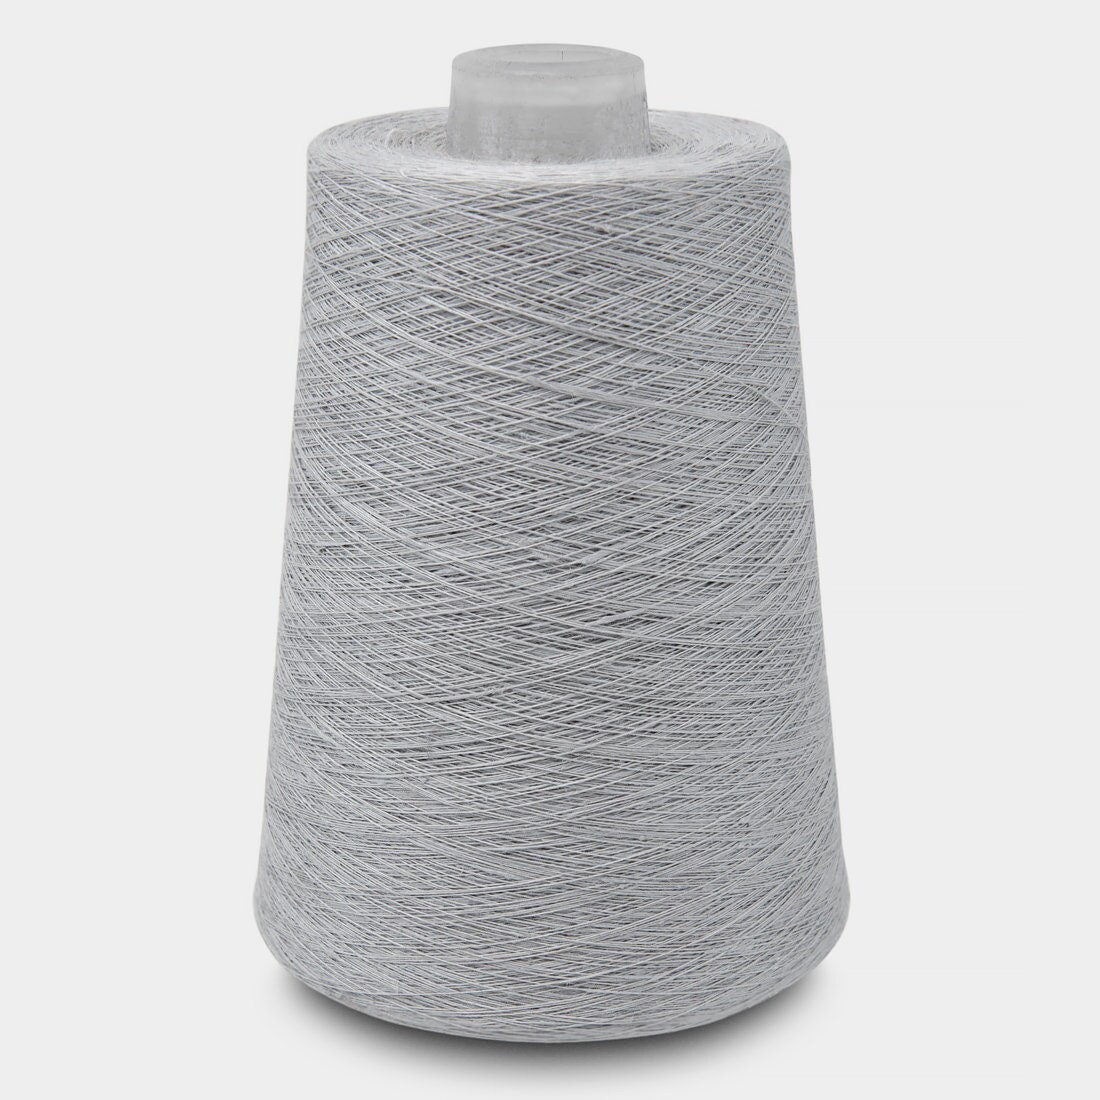 100% Linen thread weight about 950g/cone white thin twine cords for sewing  Knitting embroidery crochet DIY - AliExpress